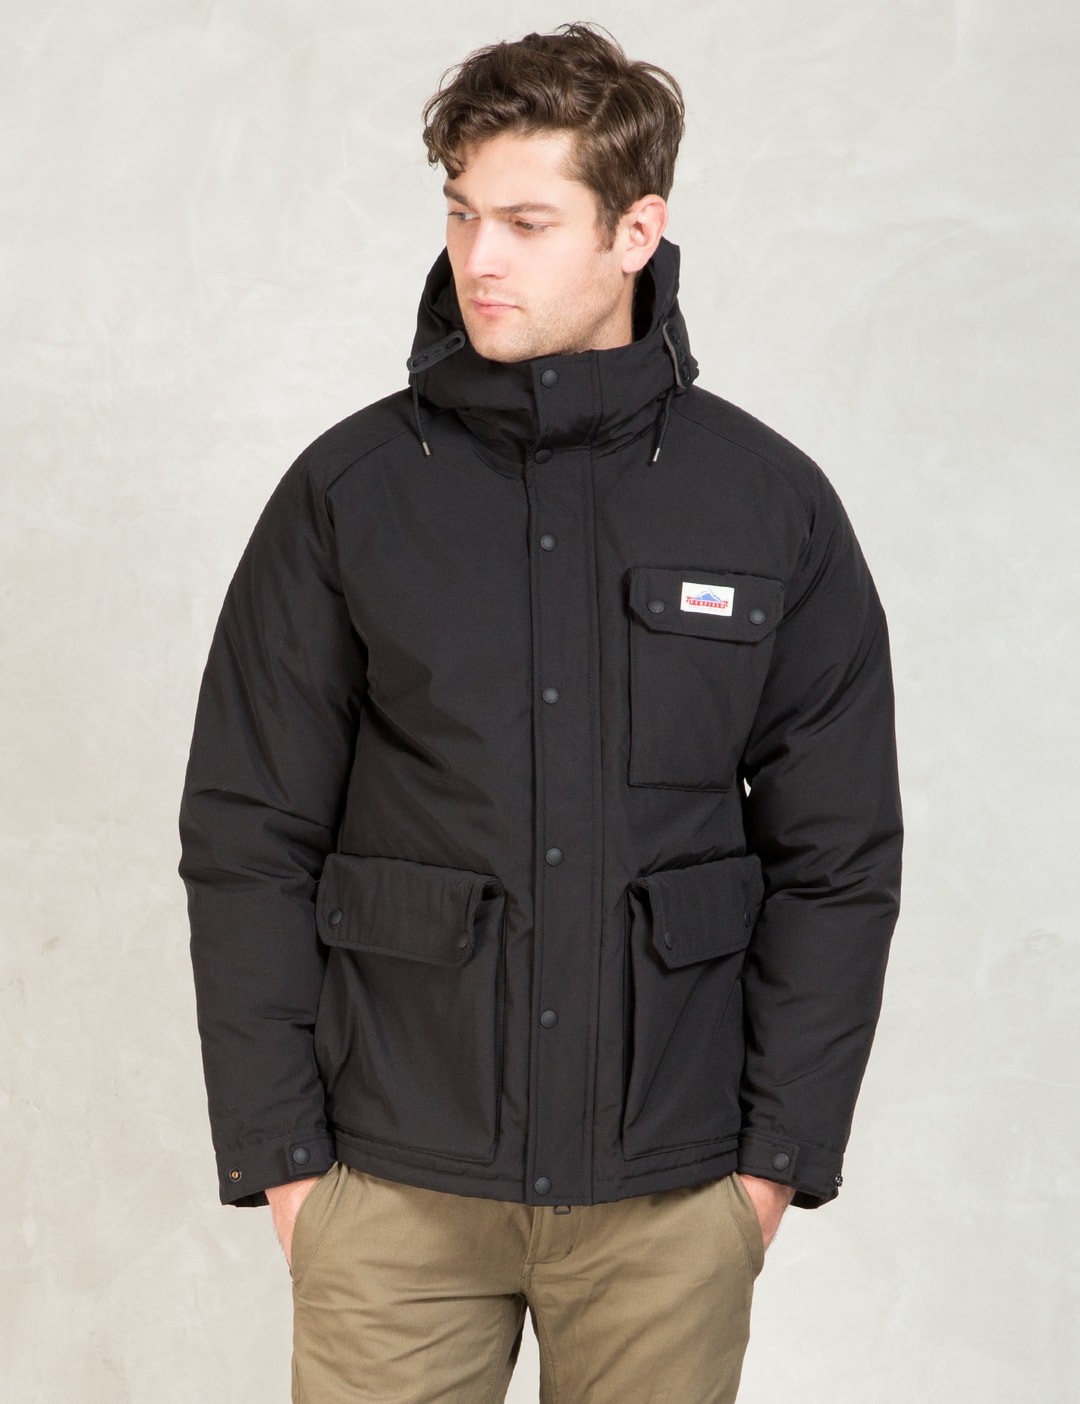 Penfield - Black Apex Down Insulated Parka Jacket | HBX - Globally ...